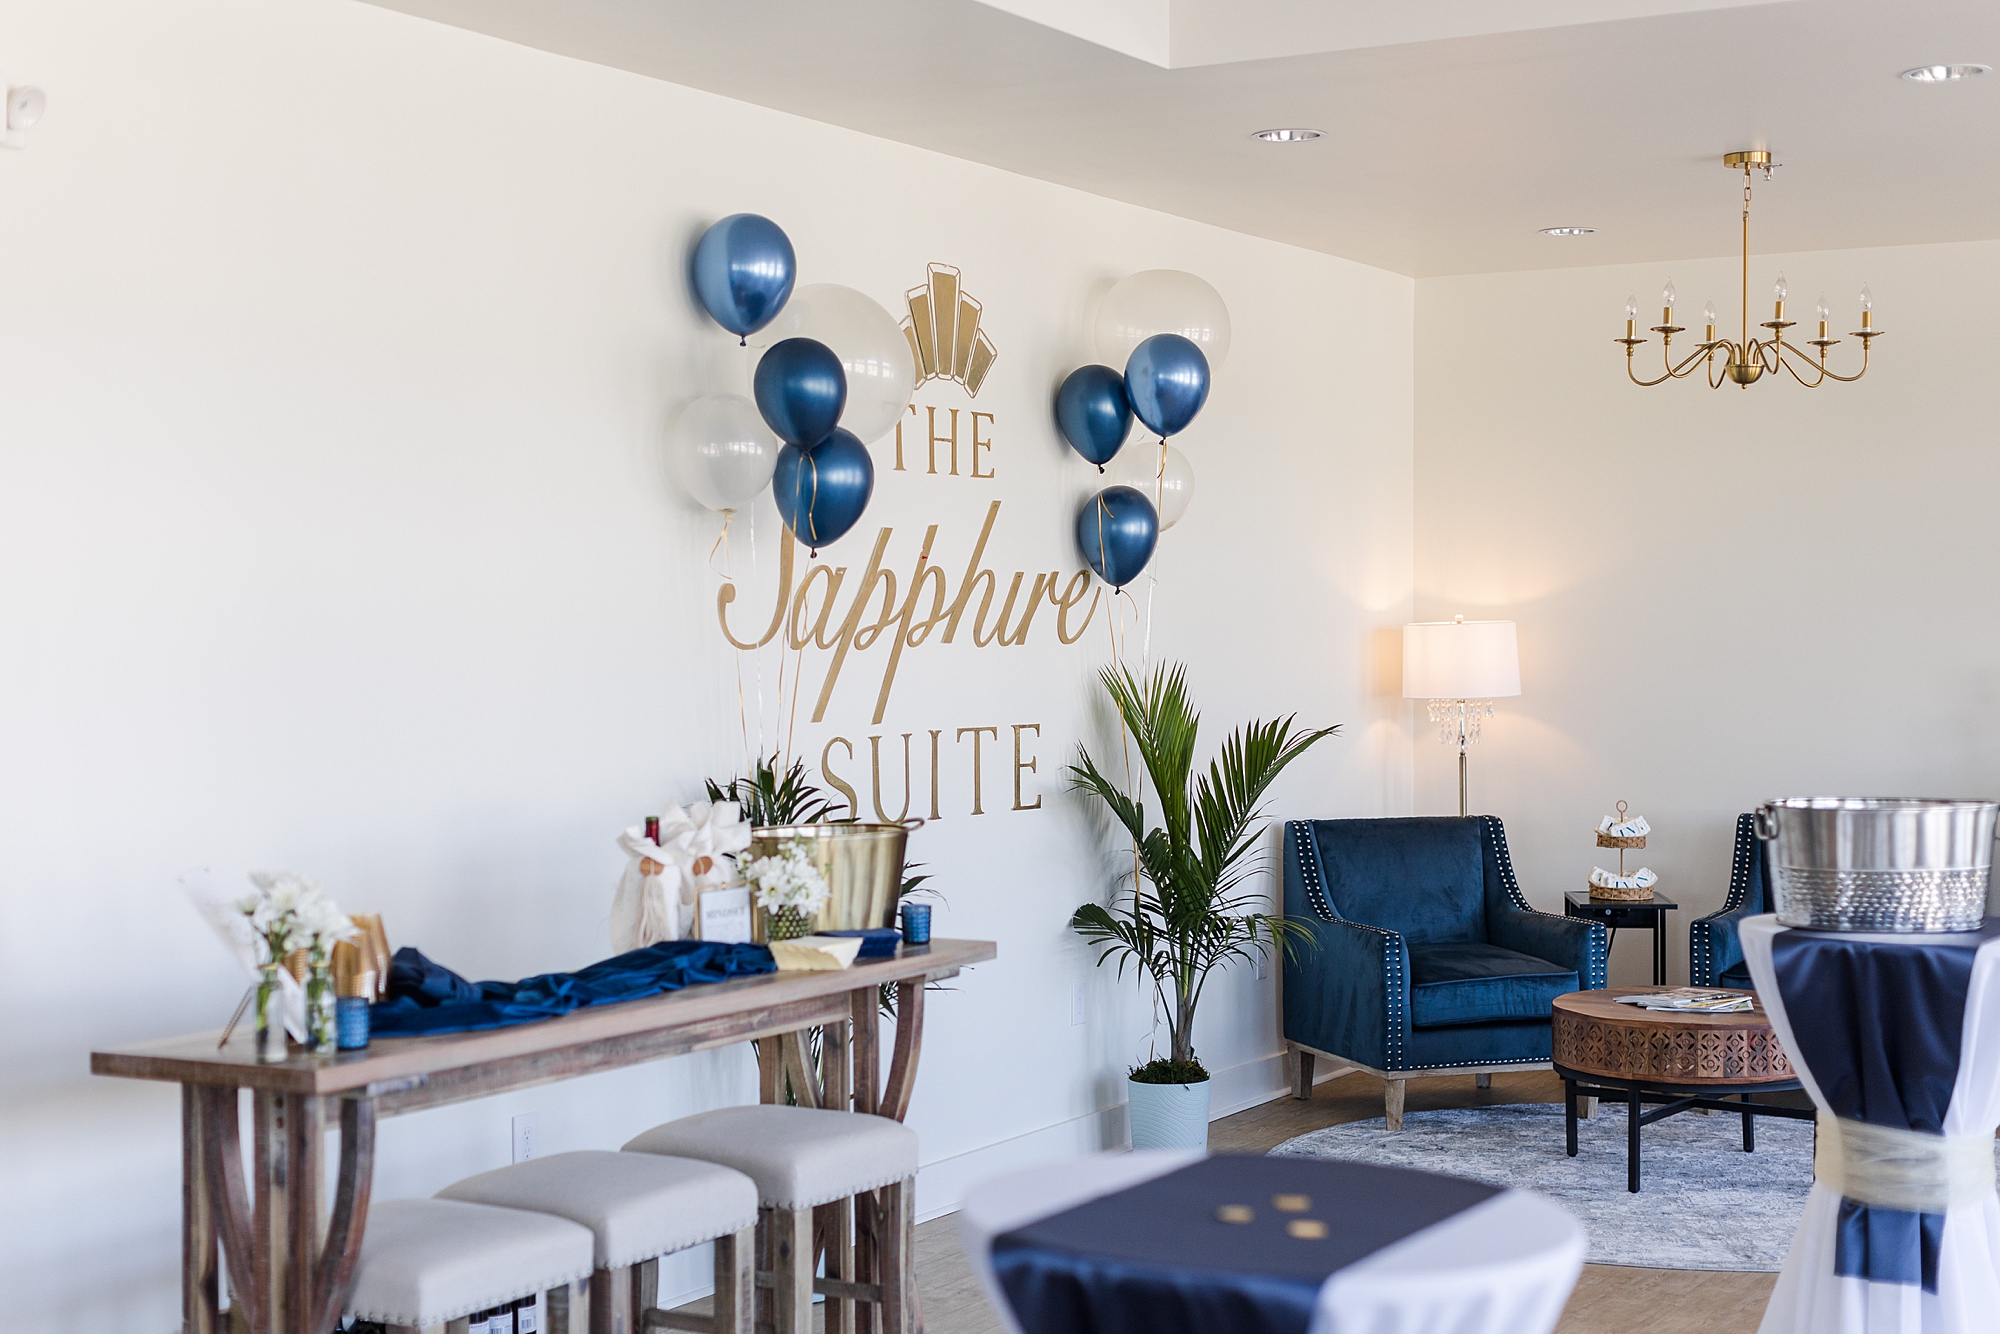 blue and gold balloons hang by The Sapphire Suite sign